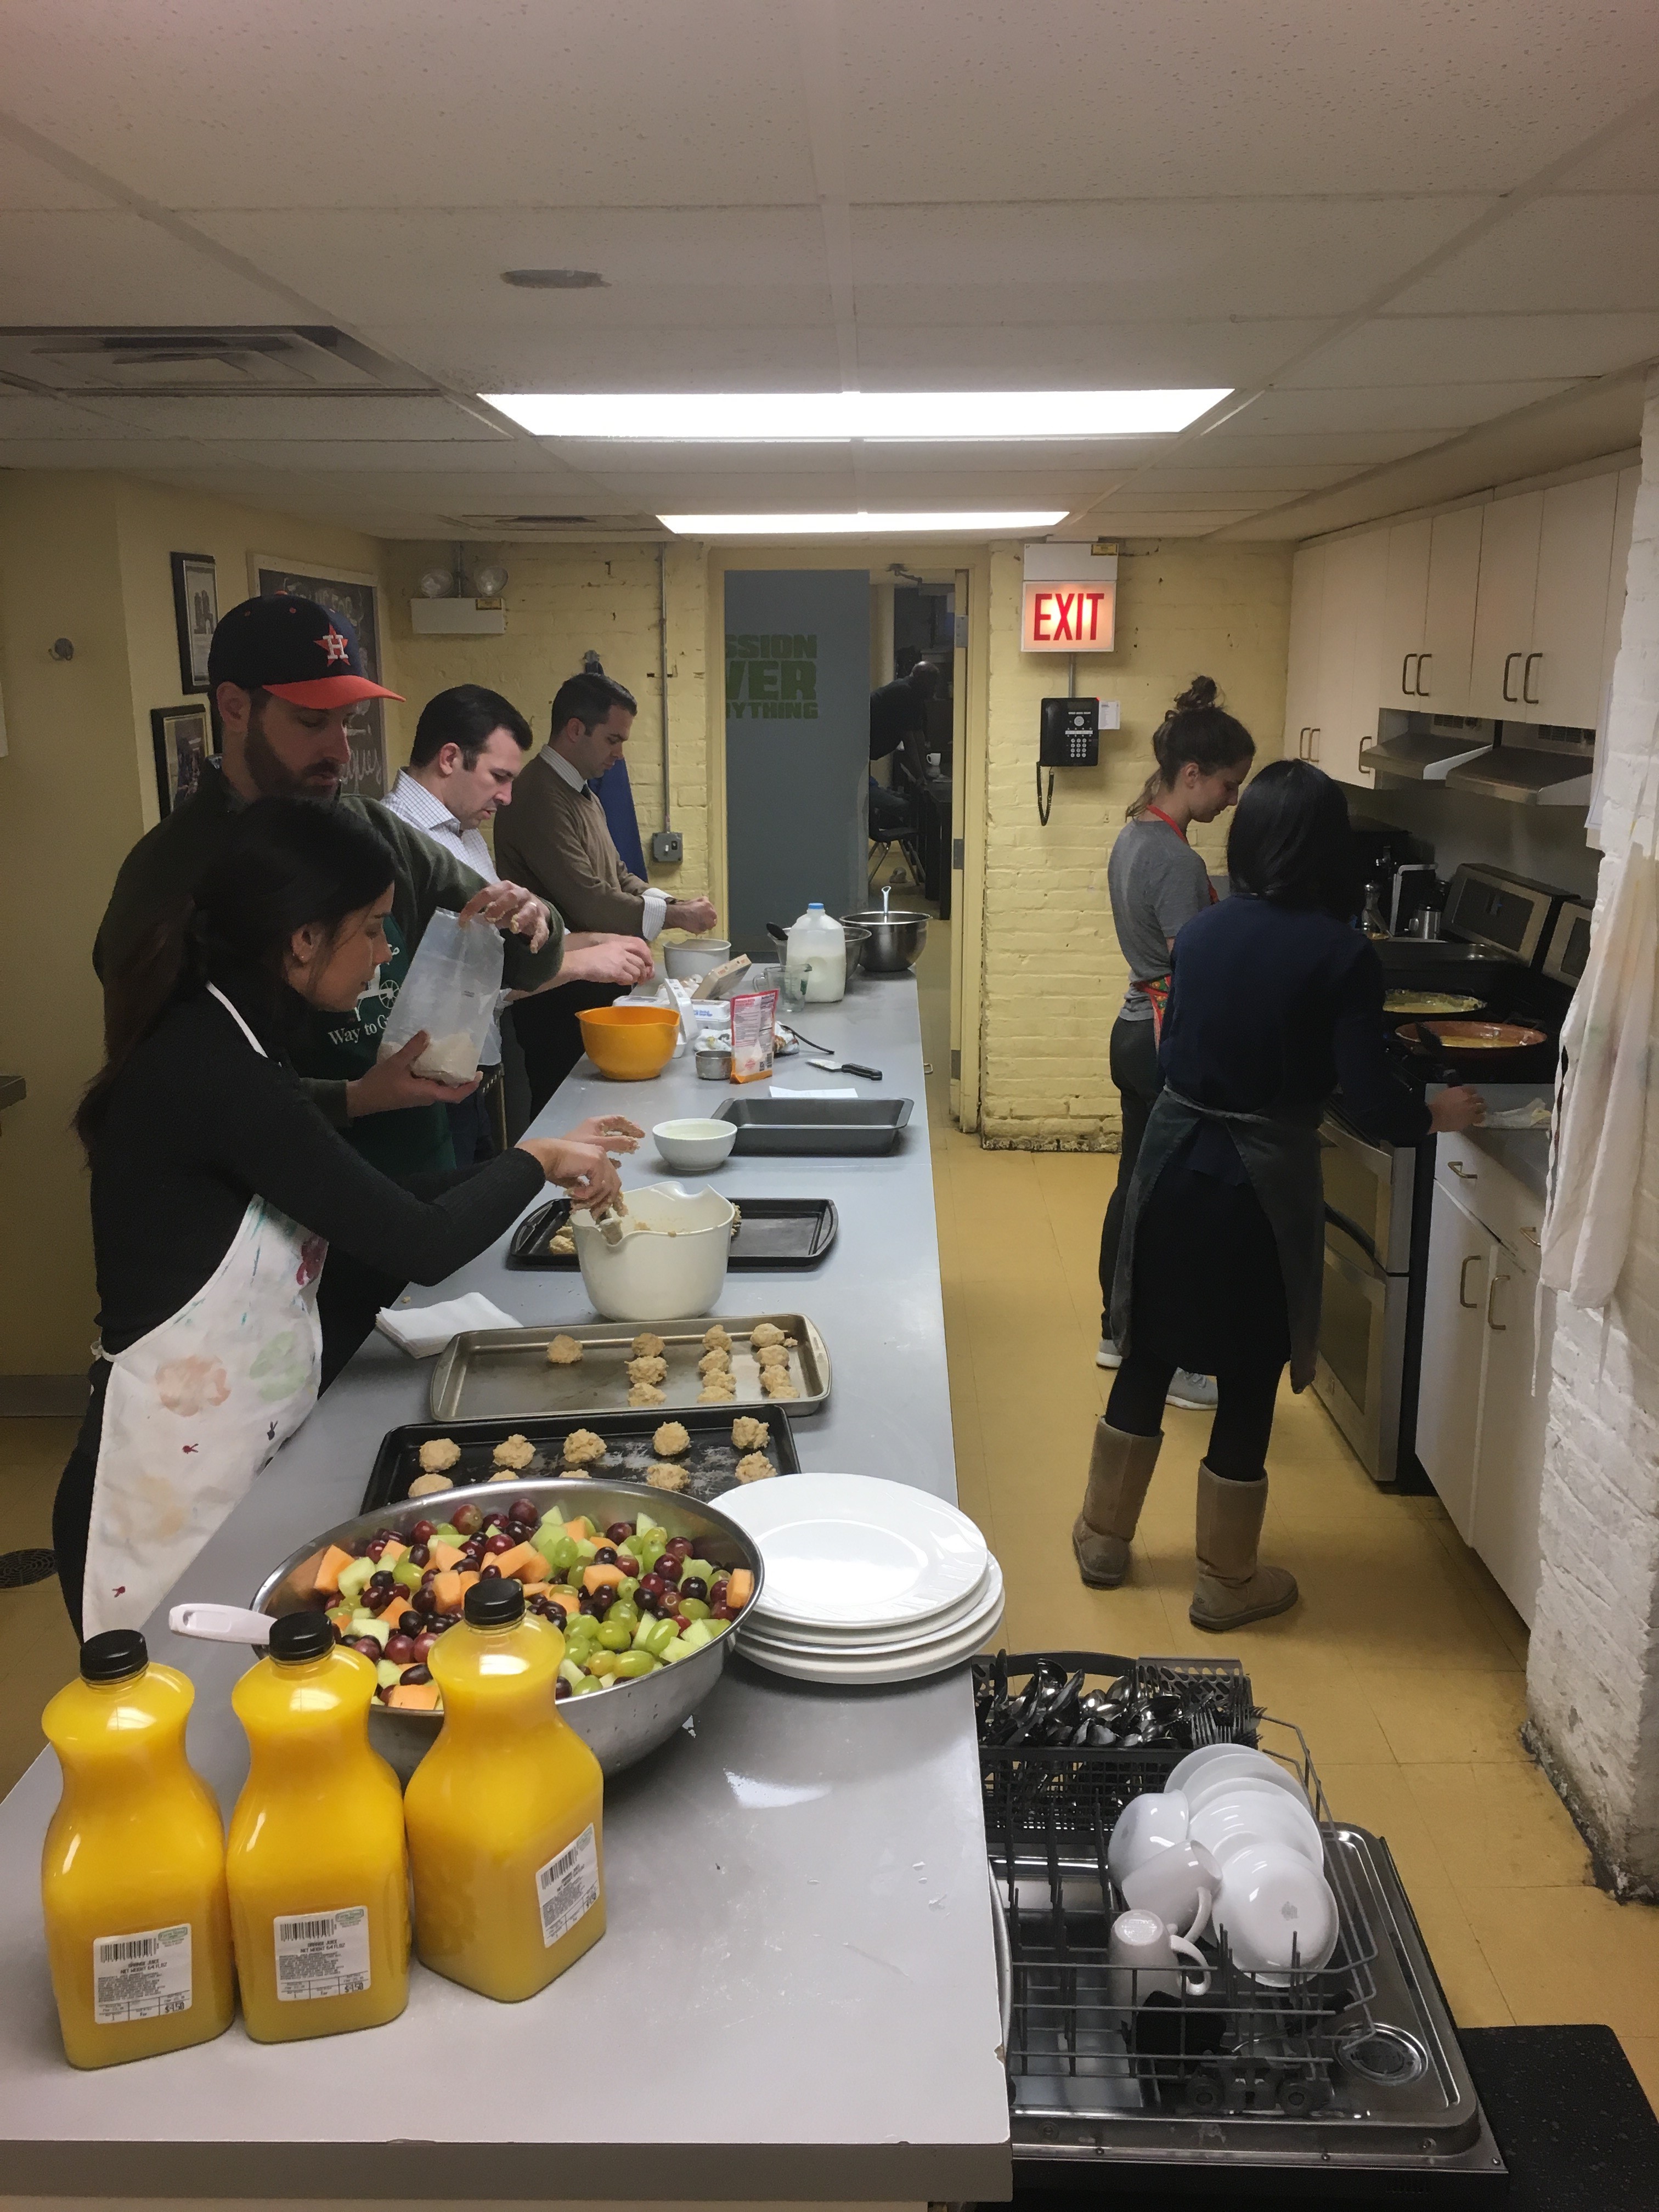 Members of the Young Lawyers Group prepare a delicious and nutritious breakfast for guests at the Lincoln Park Community Shelter.  The Young Lawyers Group prepares and serves breakfast to guests at the shelter once a month.  Please reach out to Alisa Finelli (alisafinelli@gmail.com) if you are interested in joining the group!